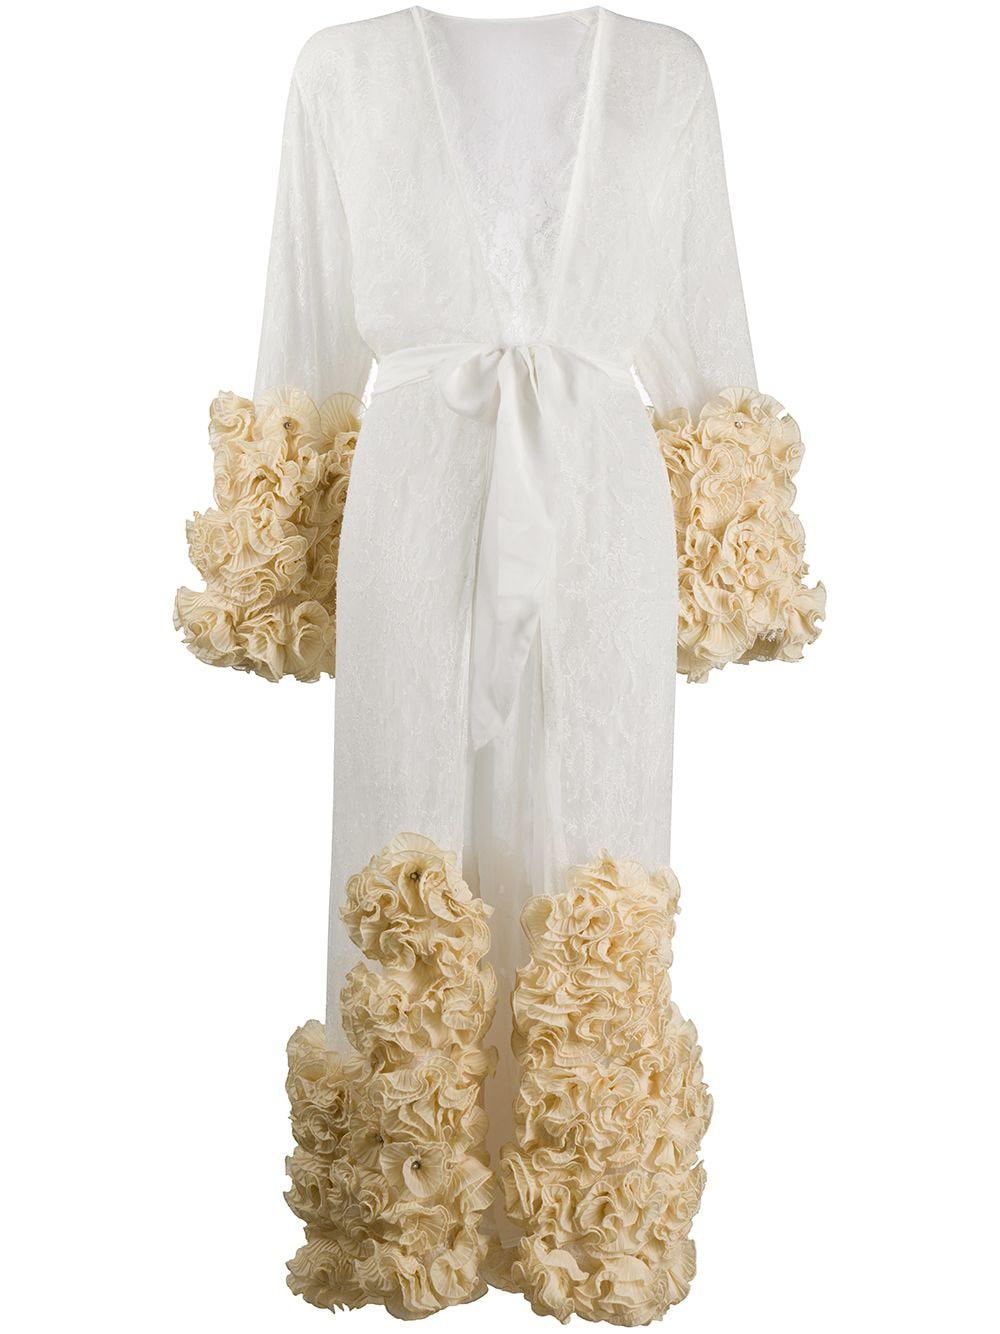 rose-appliqué lace dressing gown by DOLCI FOLLIE